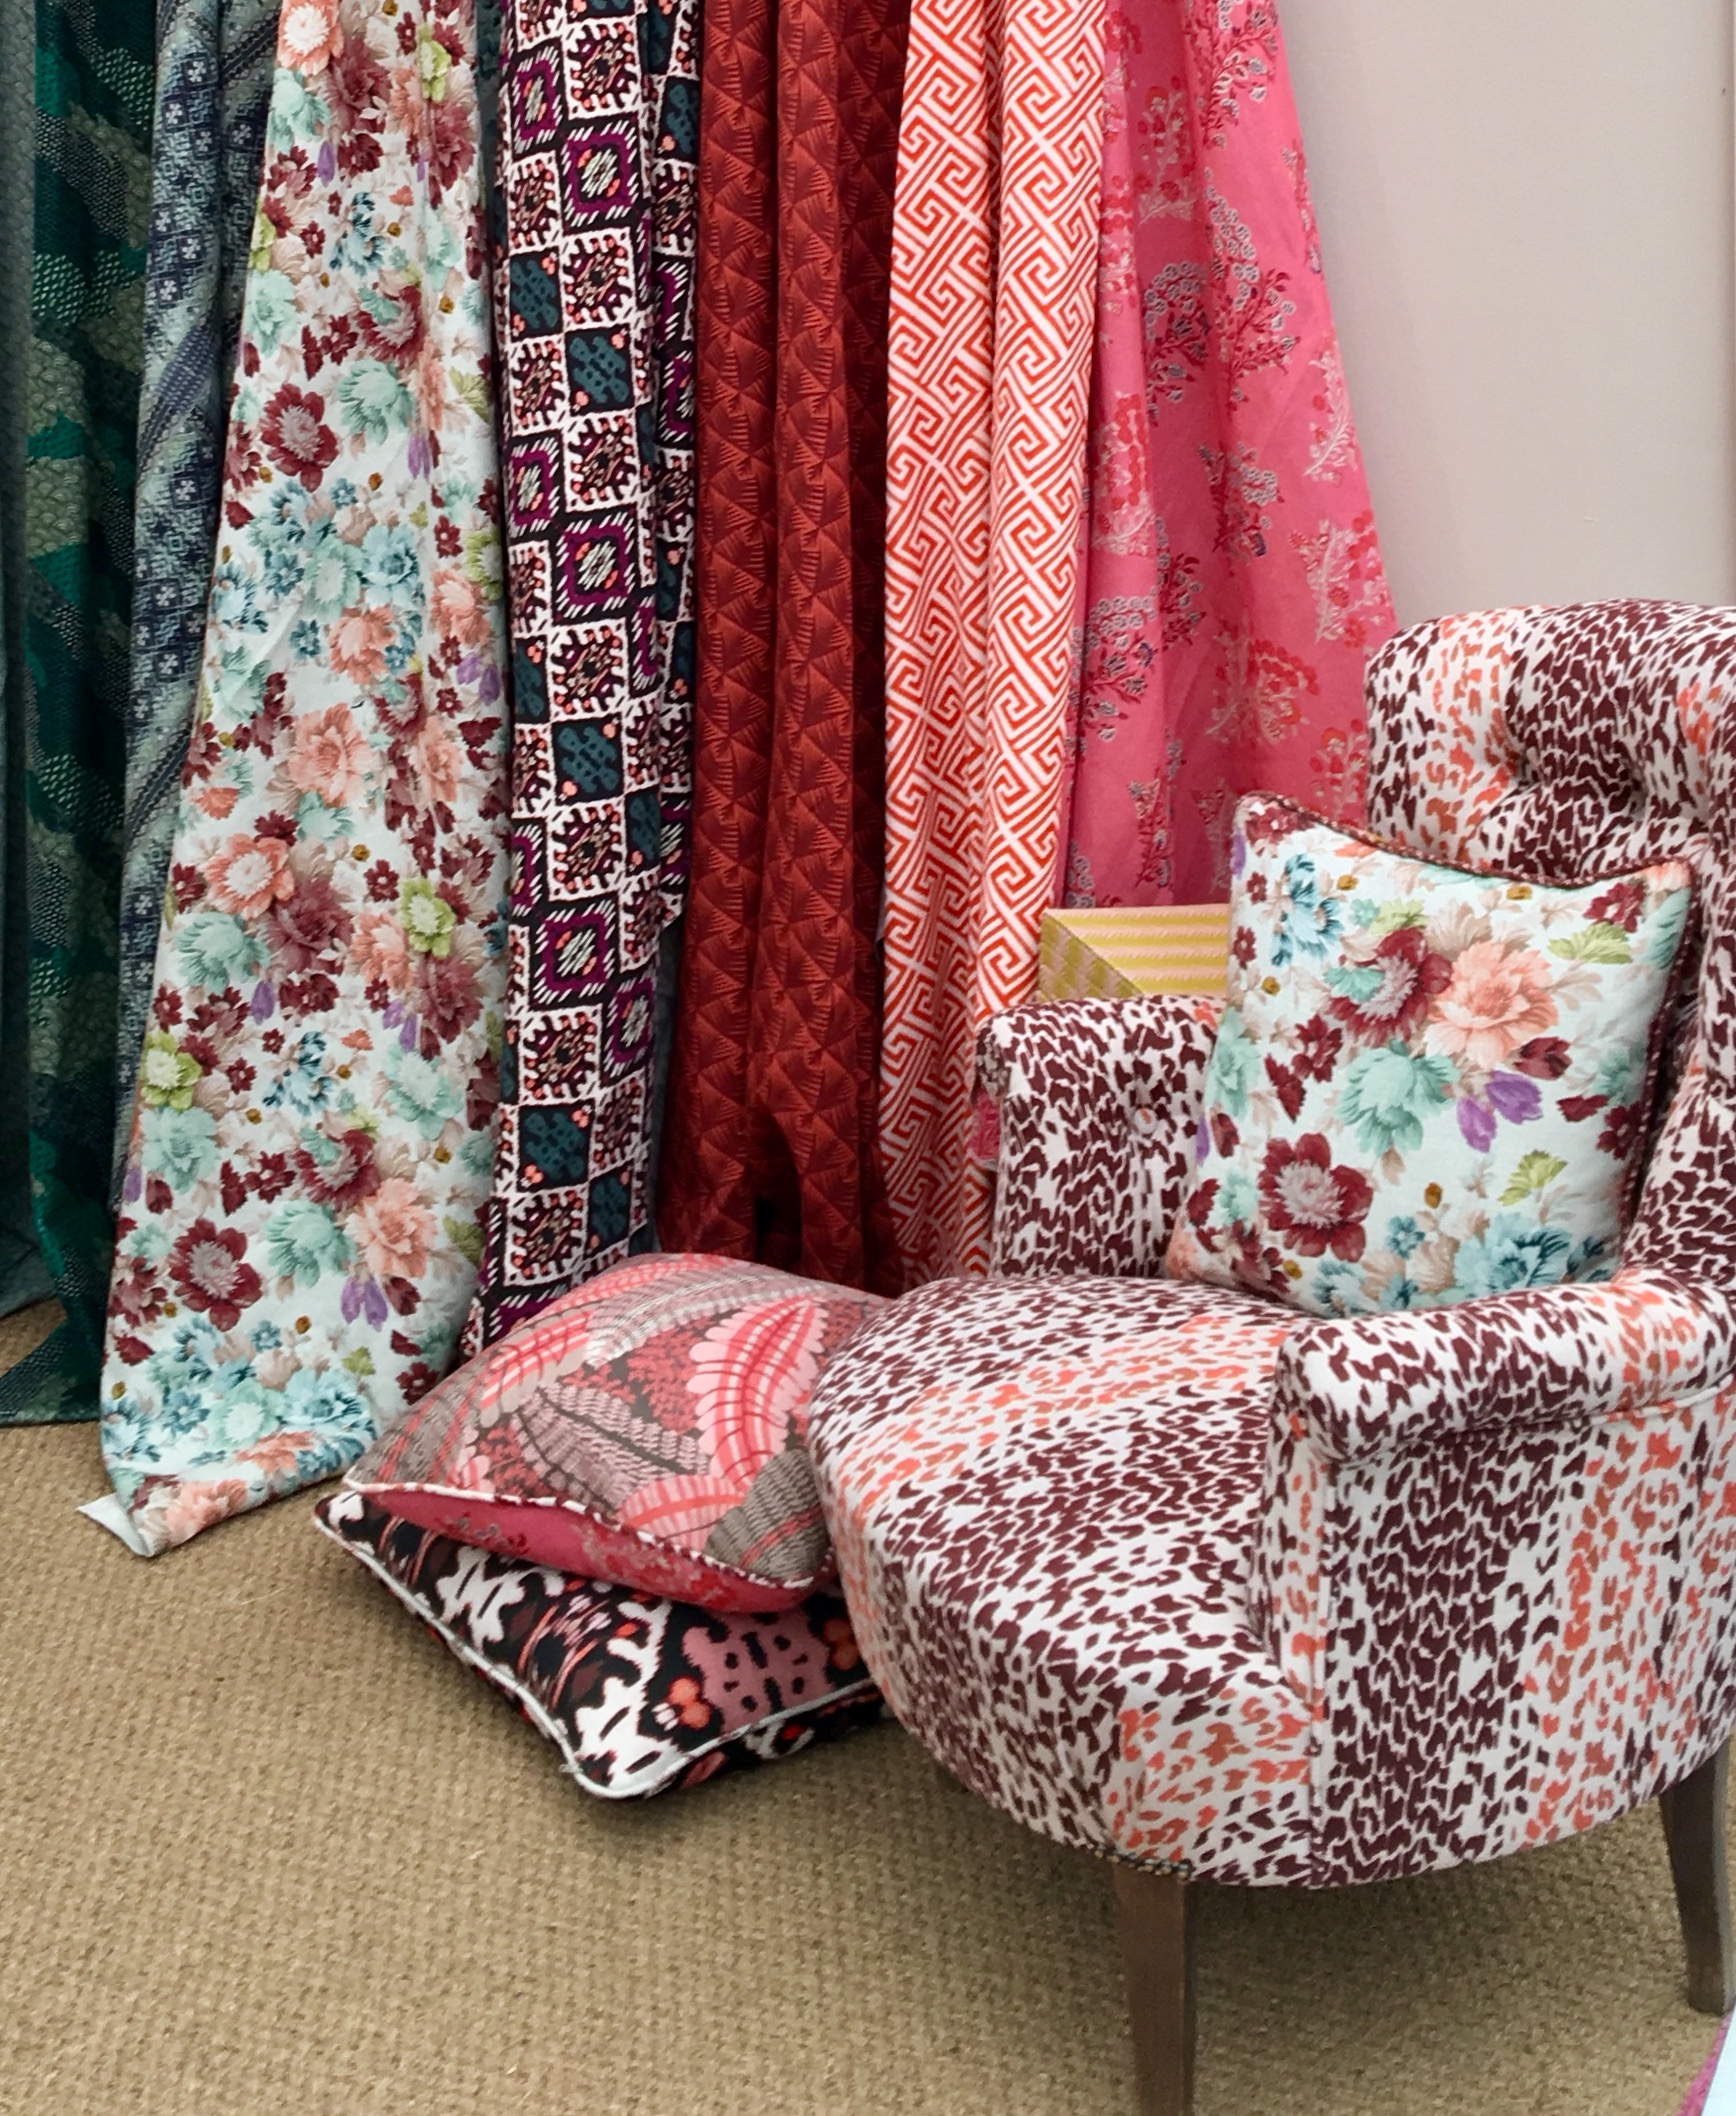 Animal print and Latest fabric designs from textile designers Parker and Jules